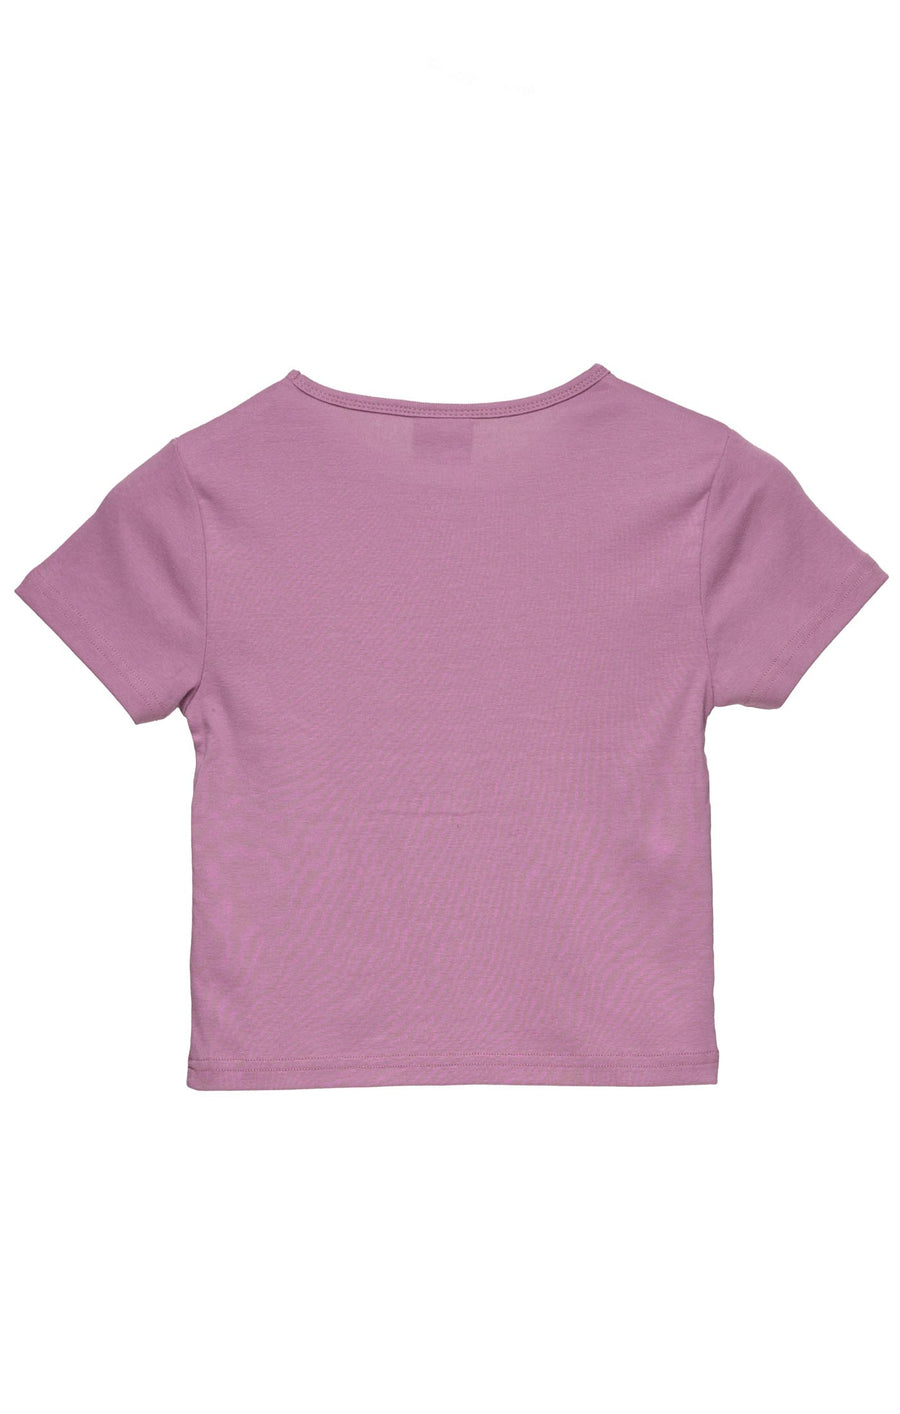 STUSSY SS LINK RIB TEE - ORCHID - WILD ROSE